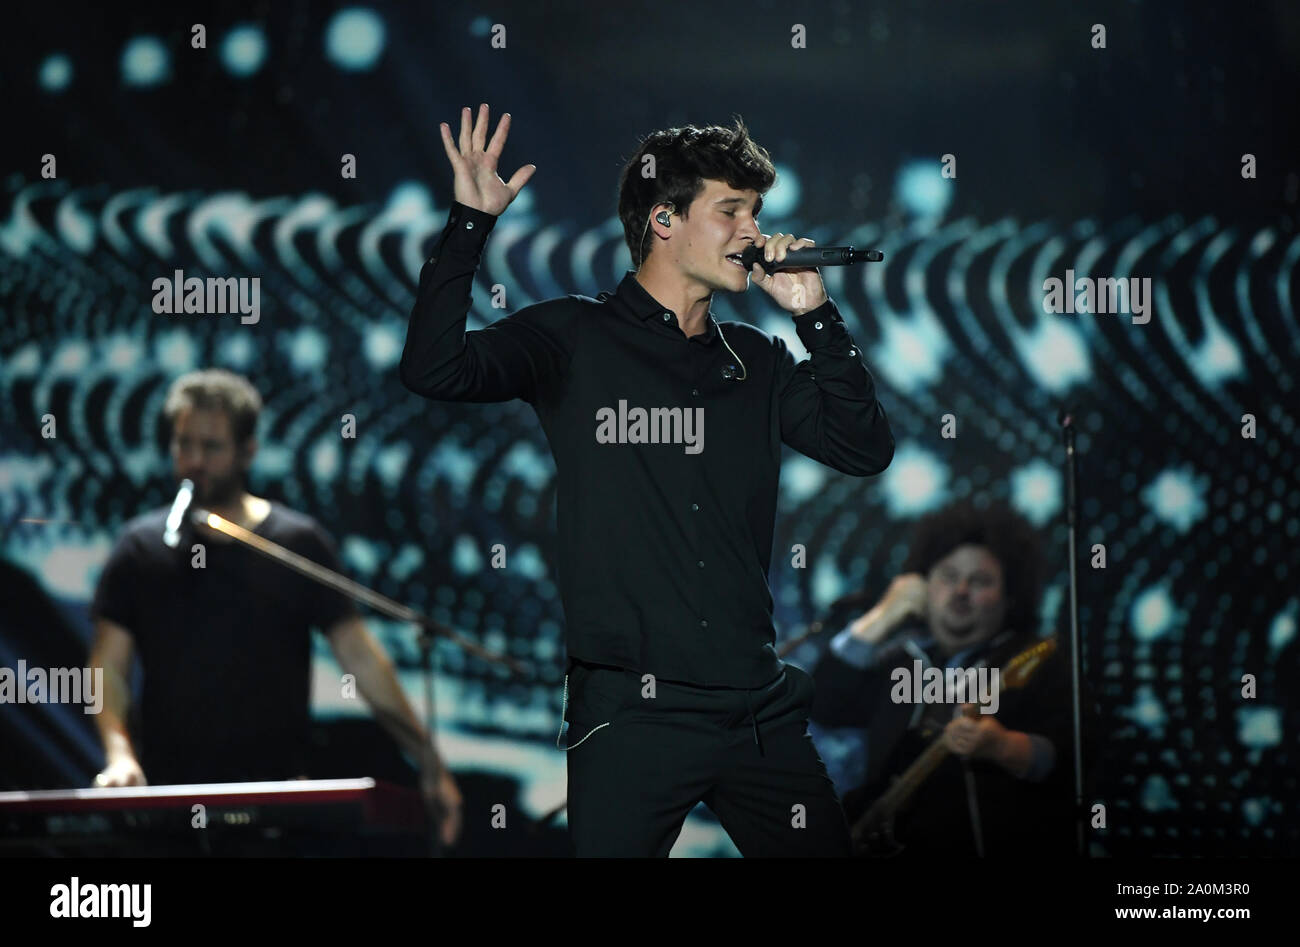 Leipzig, Germany. 20th Sep, 2019. The German pop singer Wincent Weiss is on stage during the television gala "Goldene Henne" in Leipzig. A total of 53 nominees from show business, society and sport can hope for the award. The Golden Hen is dedicated to the GDR entertainer Helga Hahnemann, who died in 1991. The Audience Award is presented annually by Mitteldeutscher Rundfunk (MDR), Rundfunk Berlin-Brandenburg (RBB) and the magazine Super-Illu. Credit: Hendrik Schmidt/dpa-Zentralbild/ZB/dpa/Alamy Live News Stock Photo